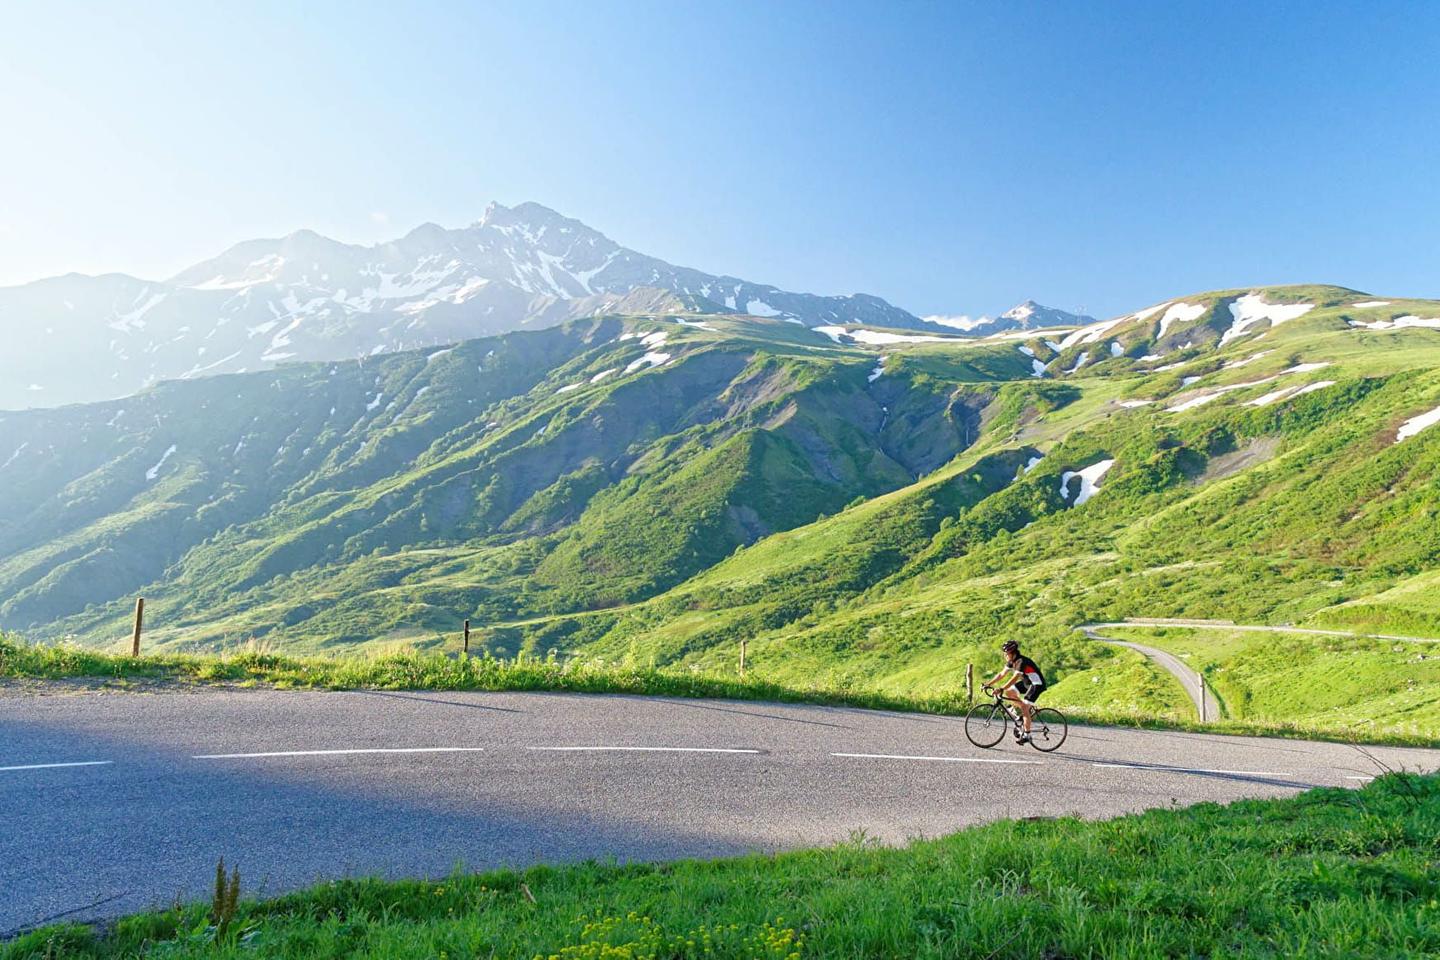 A cyclist climbing a winding road with lush green hills and snow-capped peaks in the background at Col de la Madeleine.